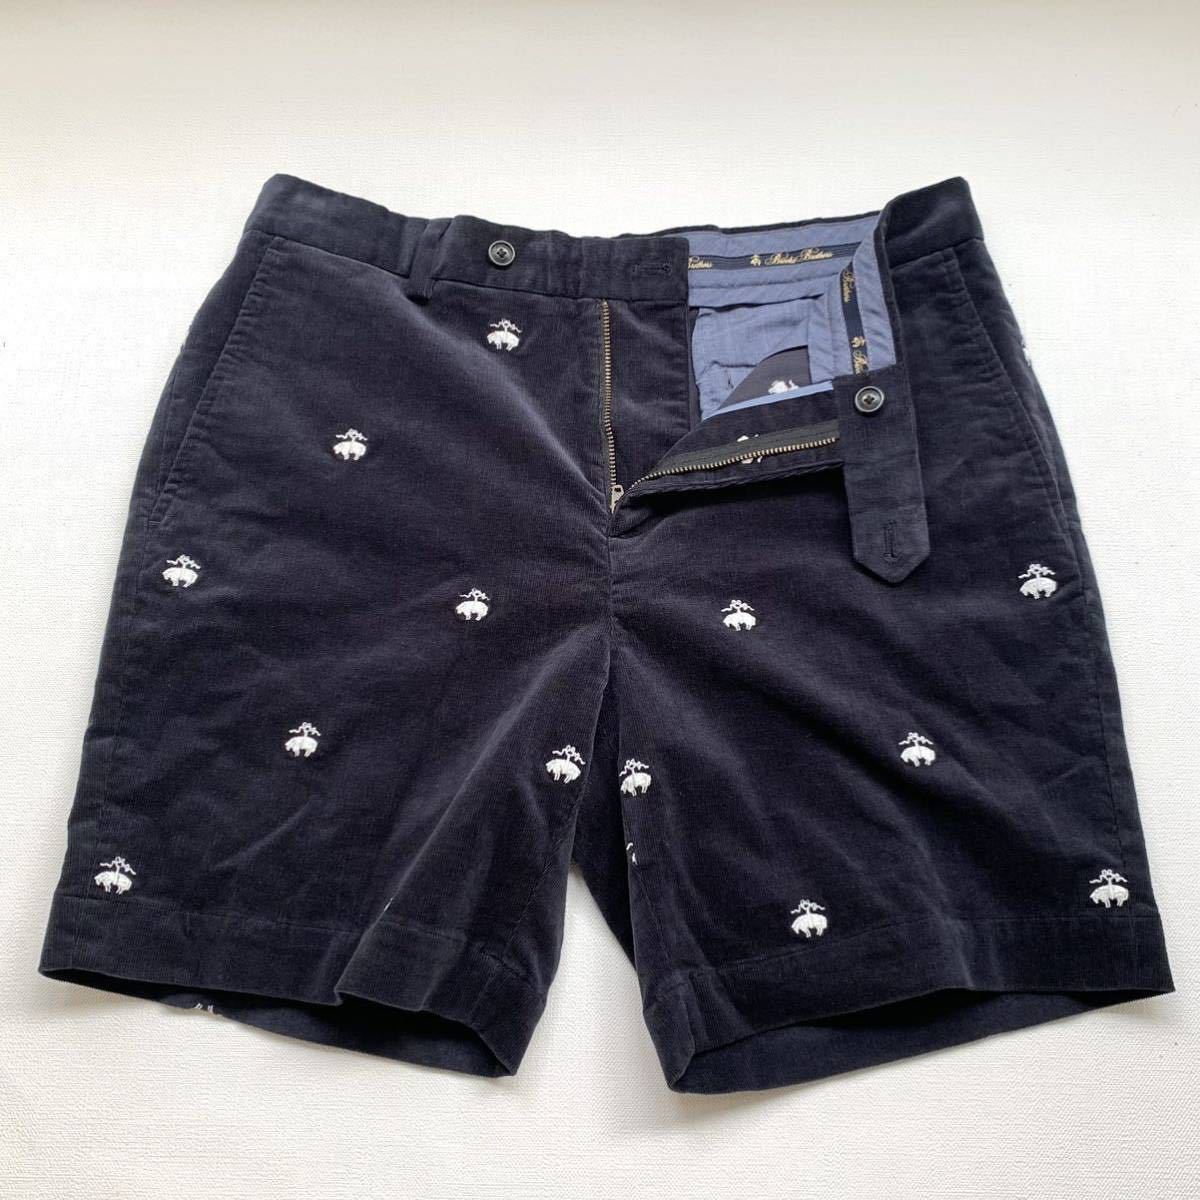  new goods regular Brooks Brothers BROOKS BROTHERS summer corduroy Golden fleece embroidery total pattern 7in shorts 36 short pants men's 